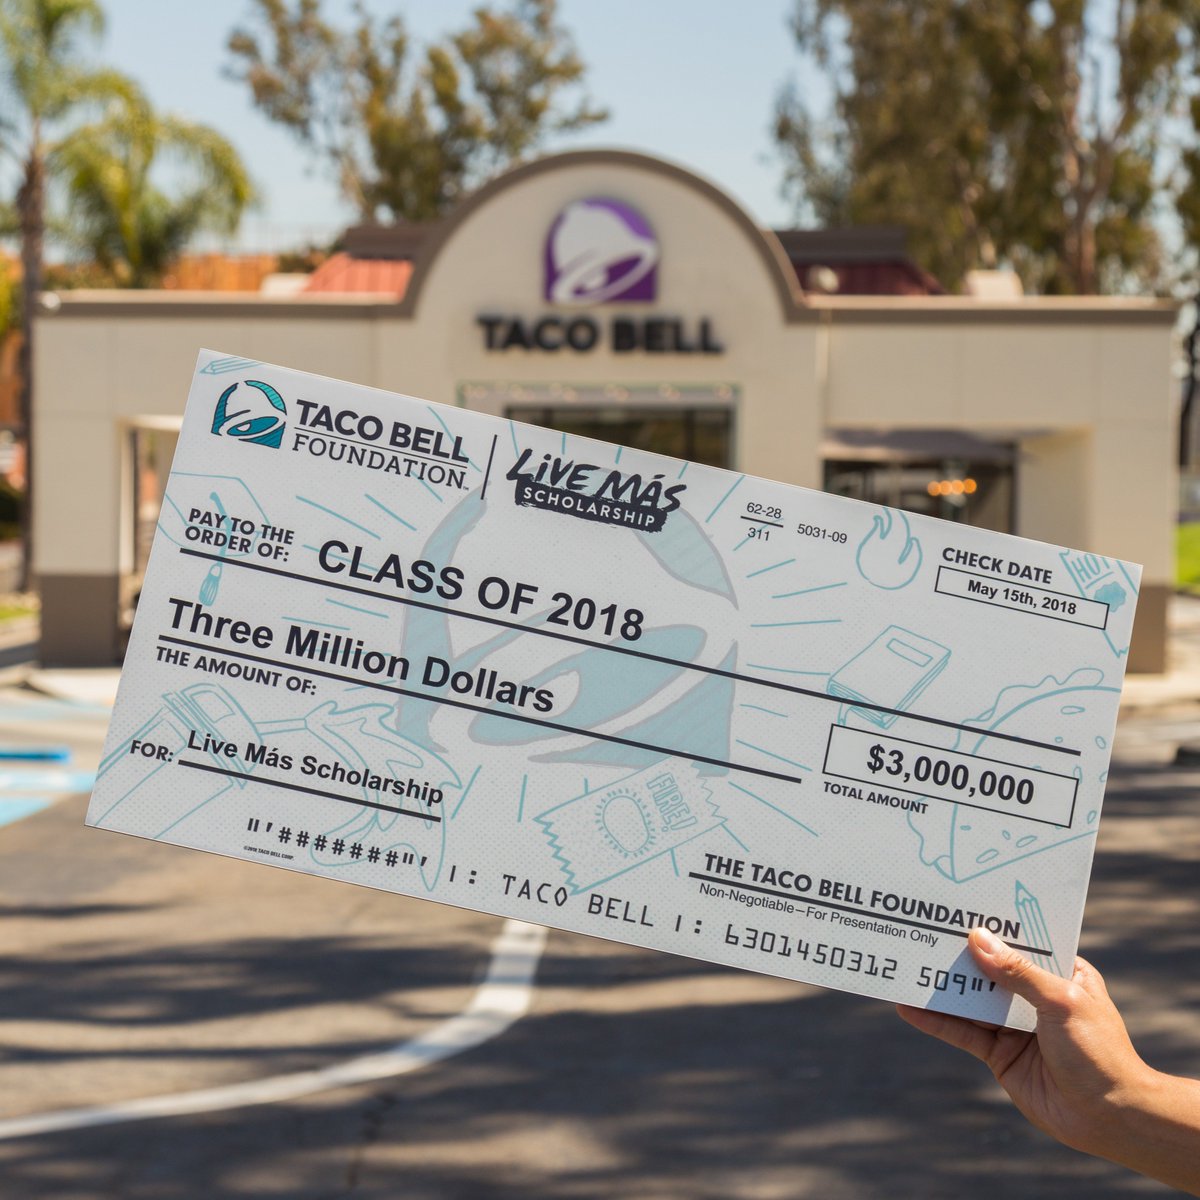 The Taco Bell Foundation is awarding more than $3 million in scholarships this year. See all the #LiveMasScholarship winners and find out how you could be next at livemasscholarship.com.